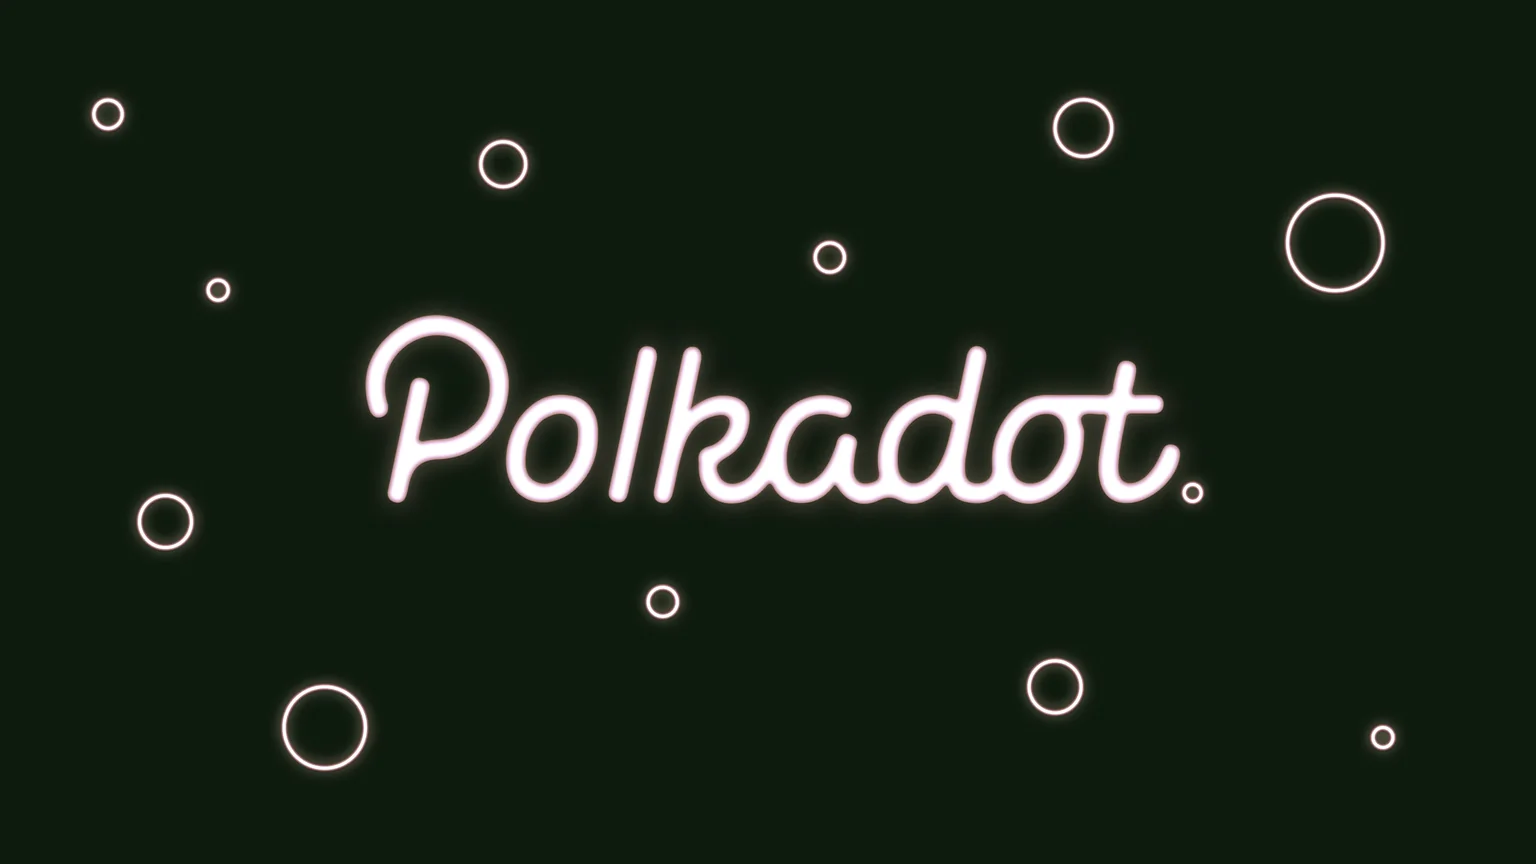 Polkadot's interoberability and scalability are attractive for developers. Image: Shutterstock